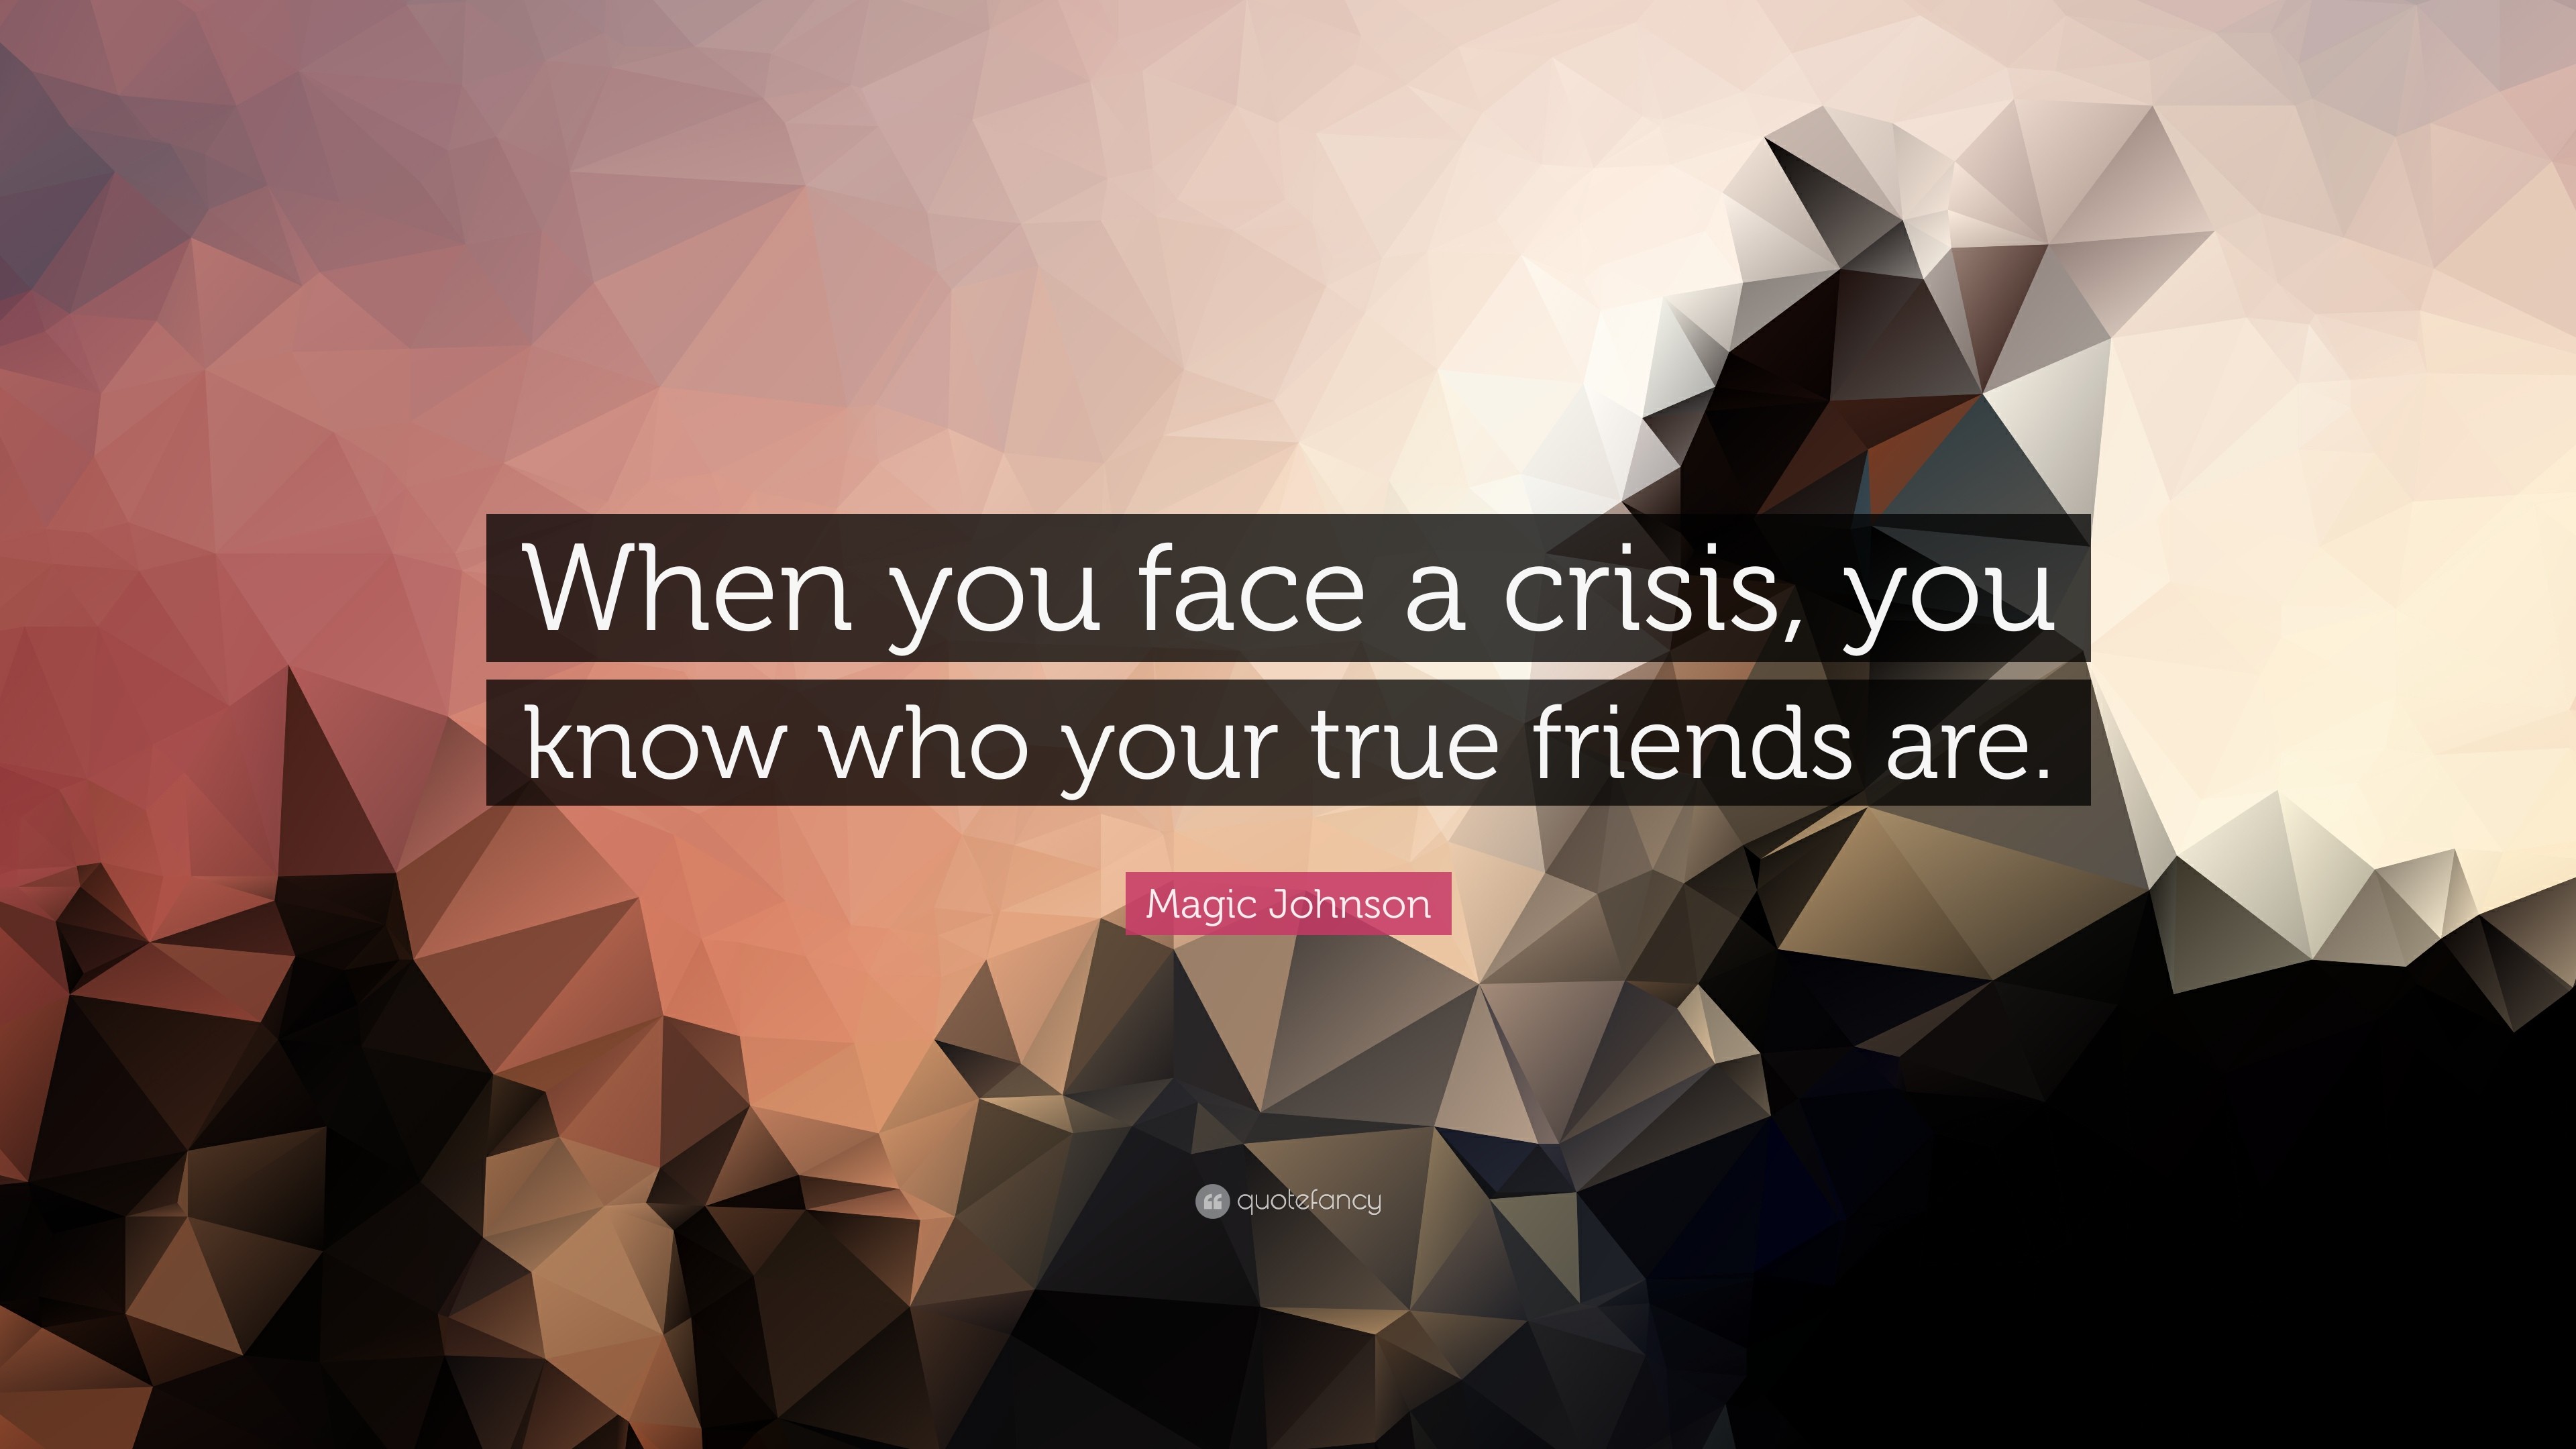 3840x2160 Magic Johnson Quote: “When you face a crisis, you know who your true